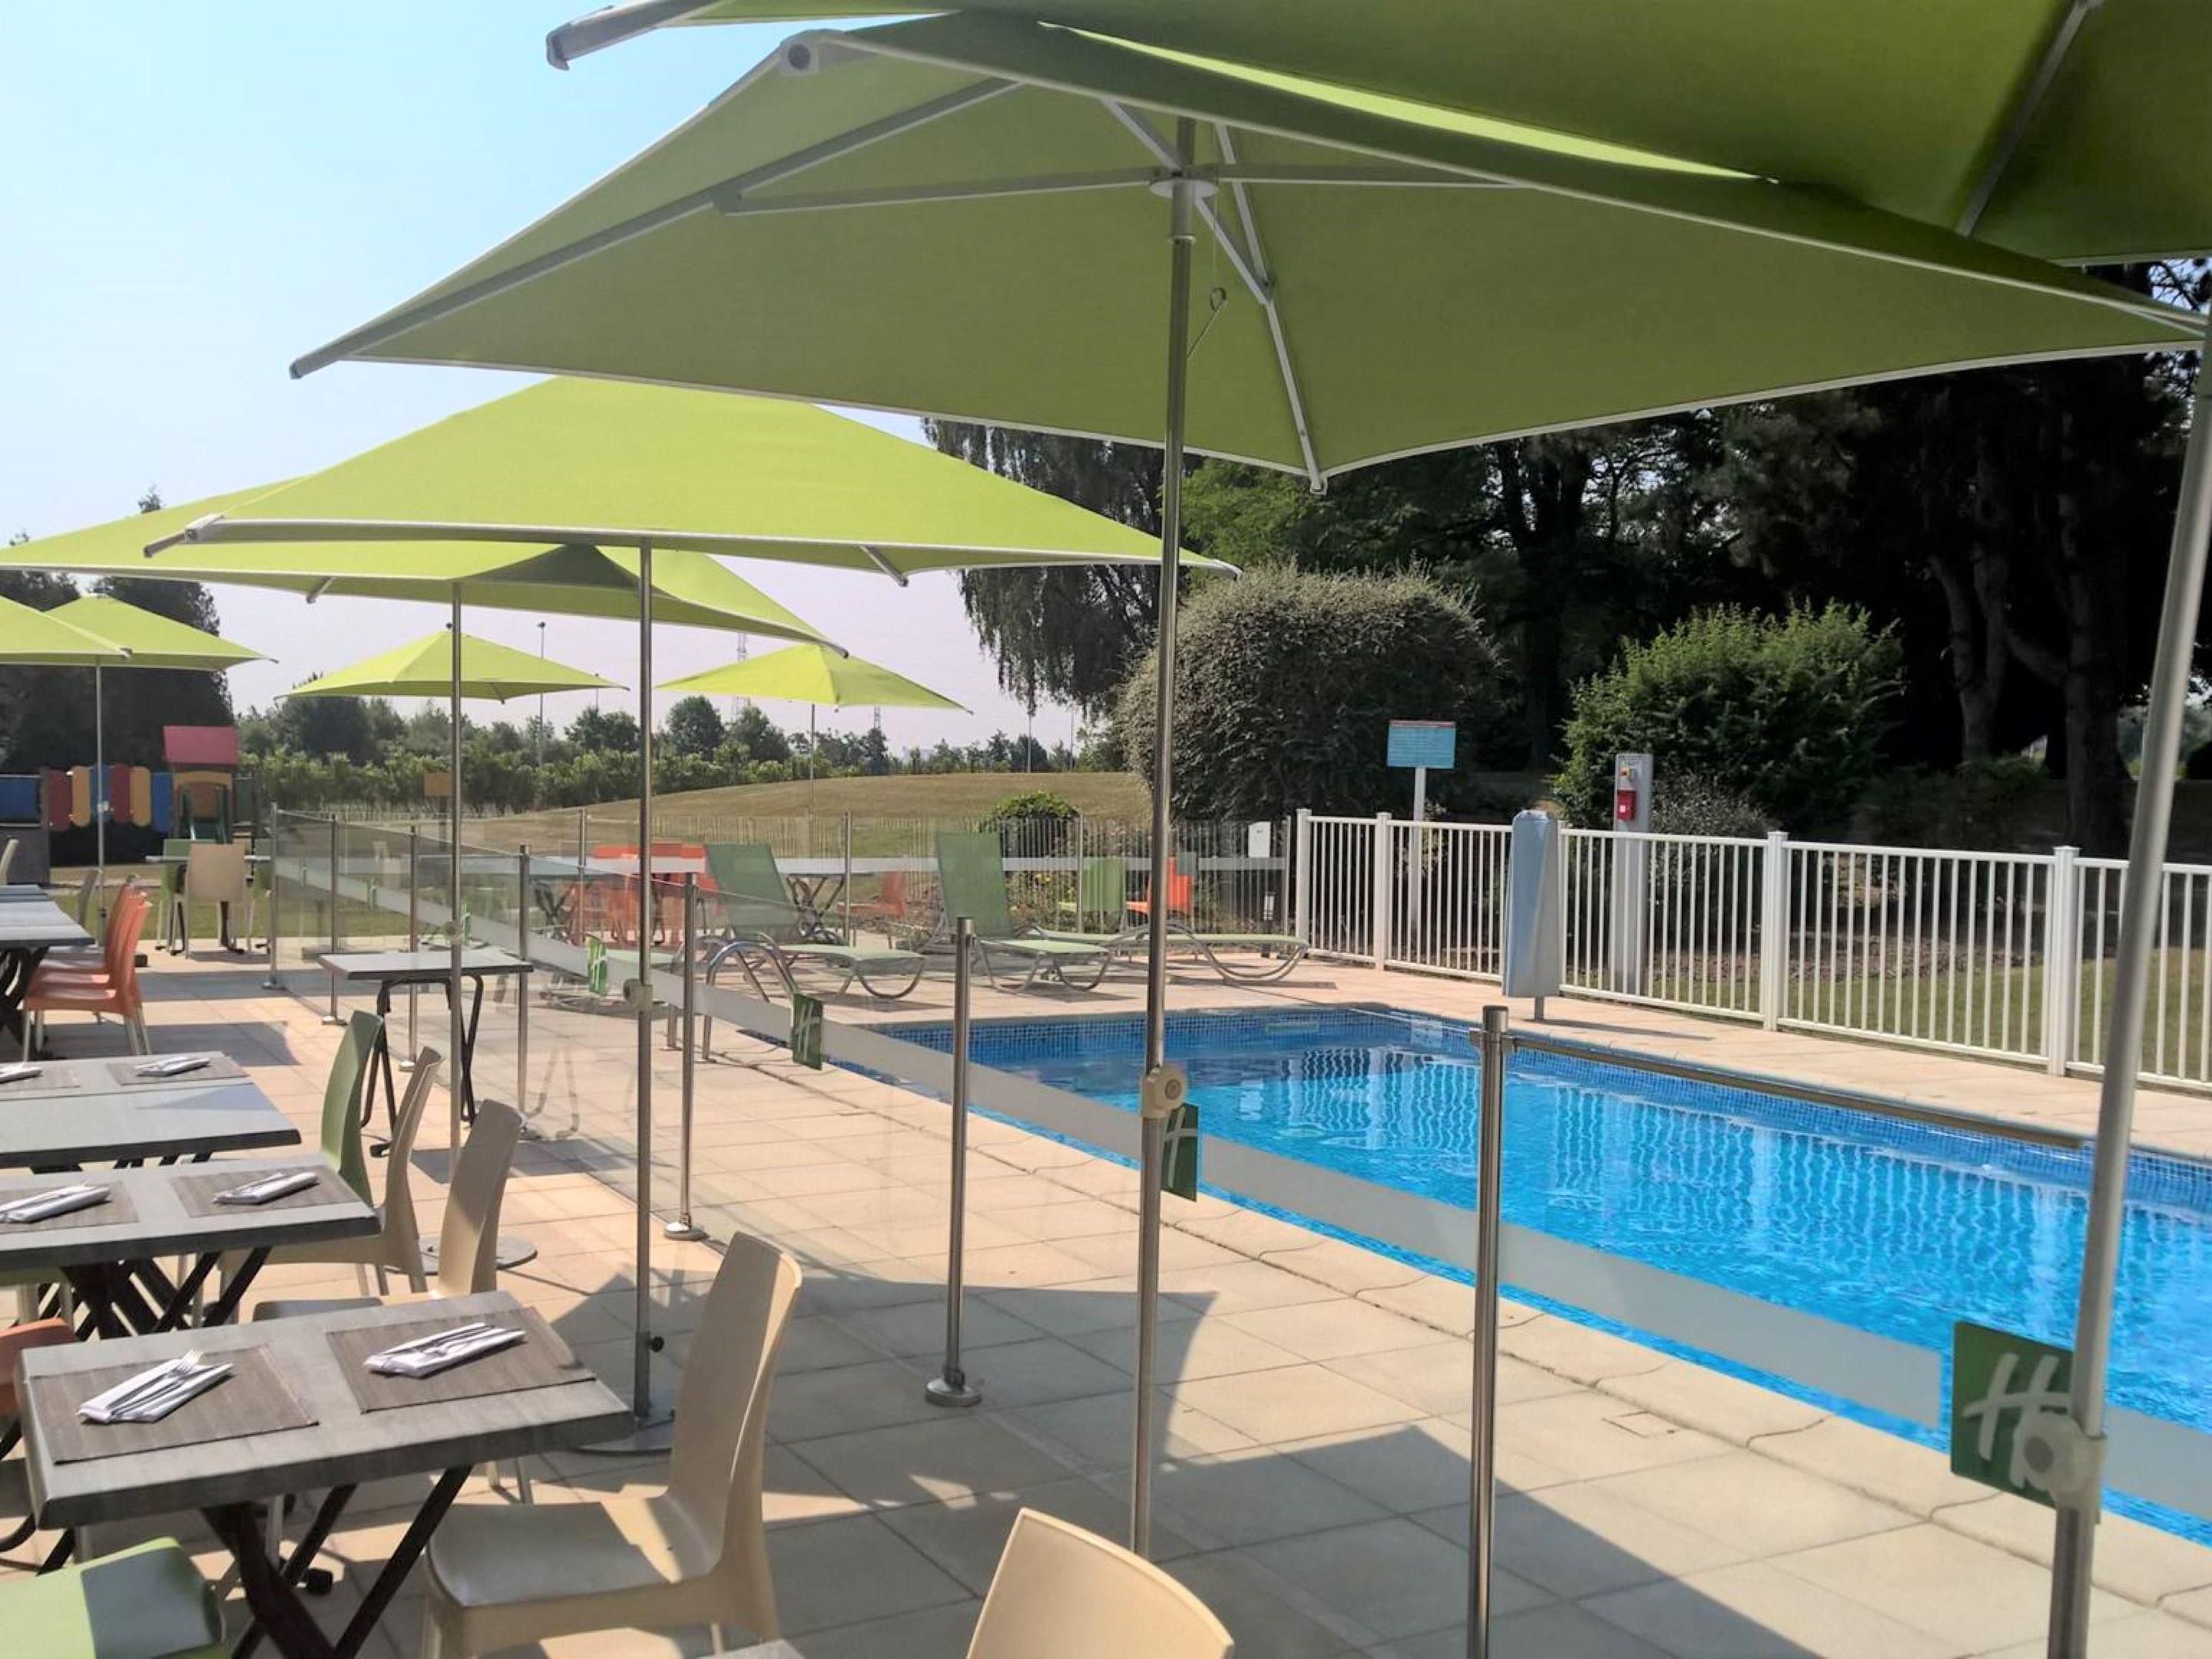 Savor tasty drinks in terrace, enjoy the sun and the outdoor swimming pool in a quiet park. Outdoor amusements for small and big children in a safe area.